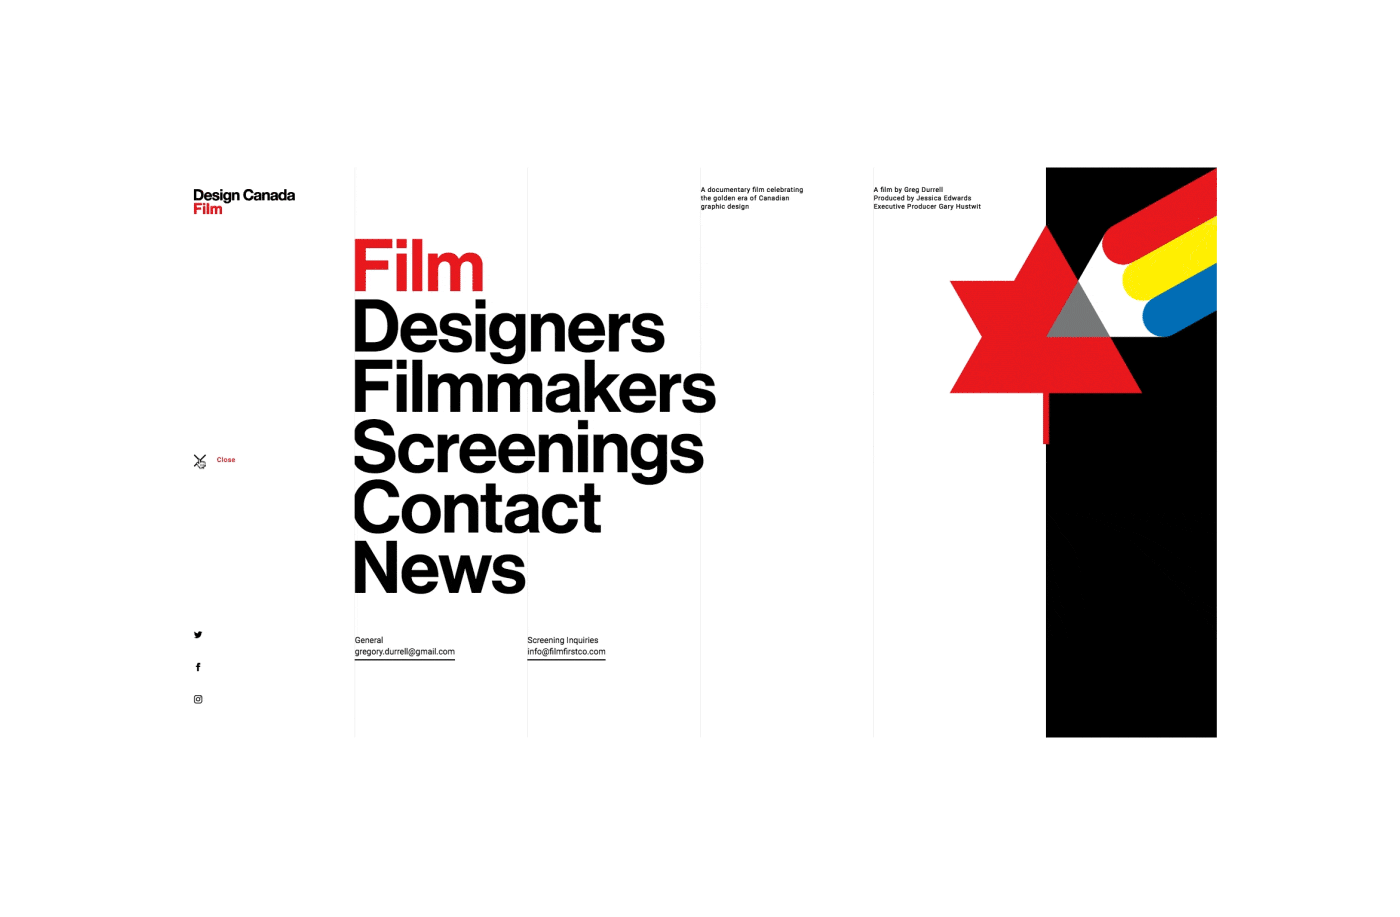 Responsive Web Experience for Design Canada Documentary